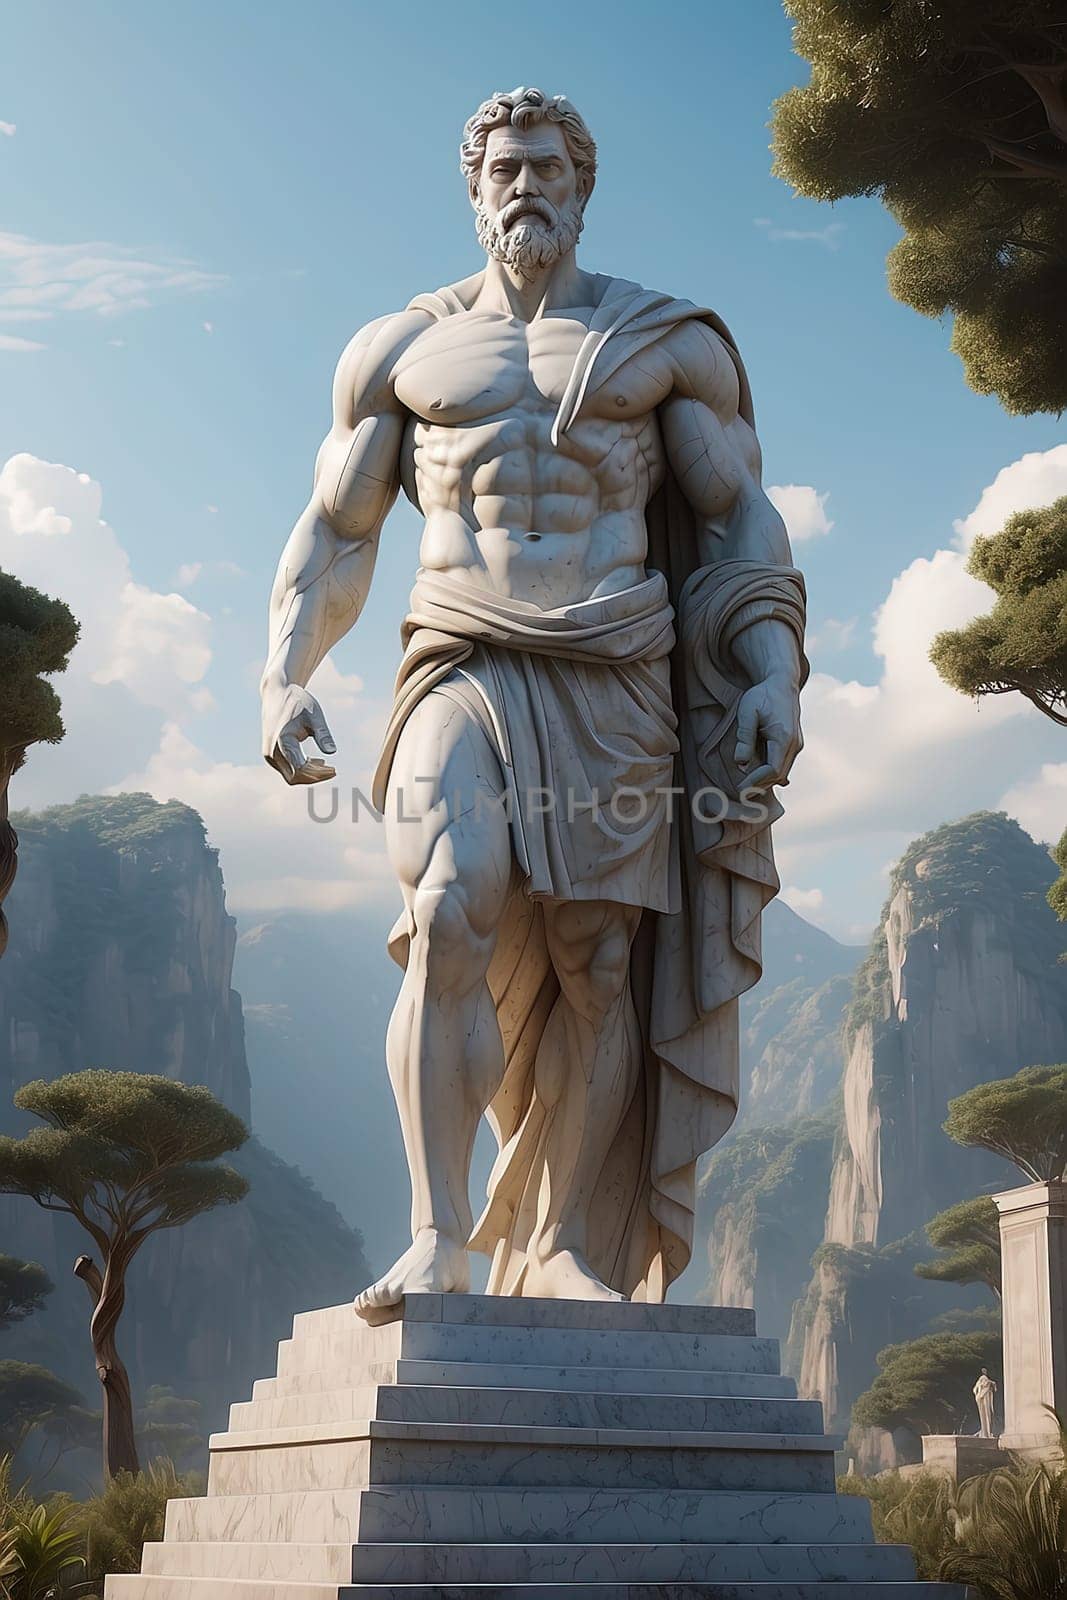 Statue of warrior man in park from greek mythology by Waseem-Creations